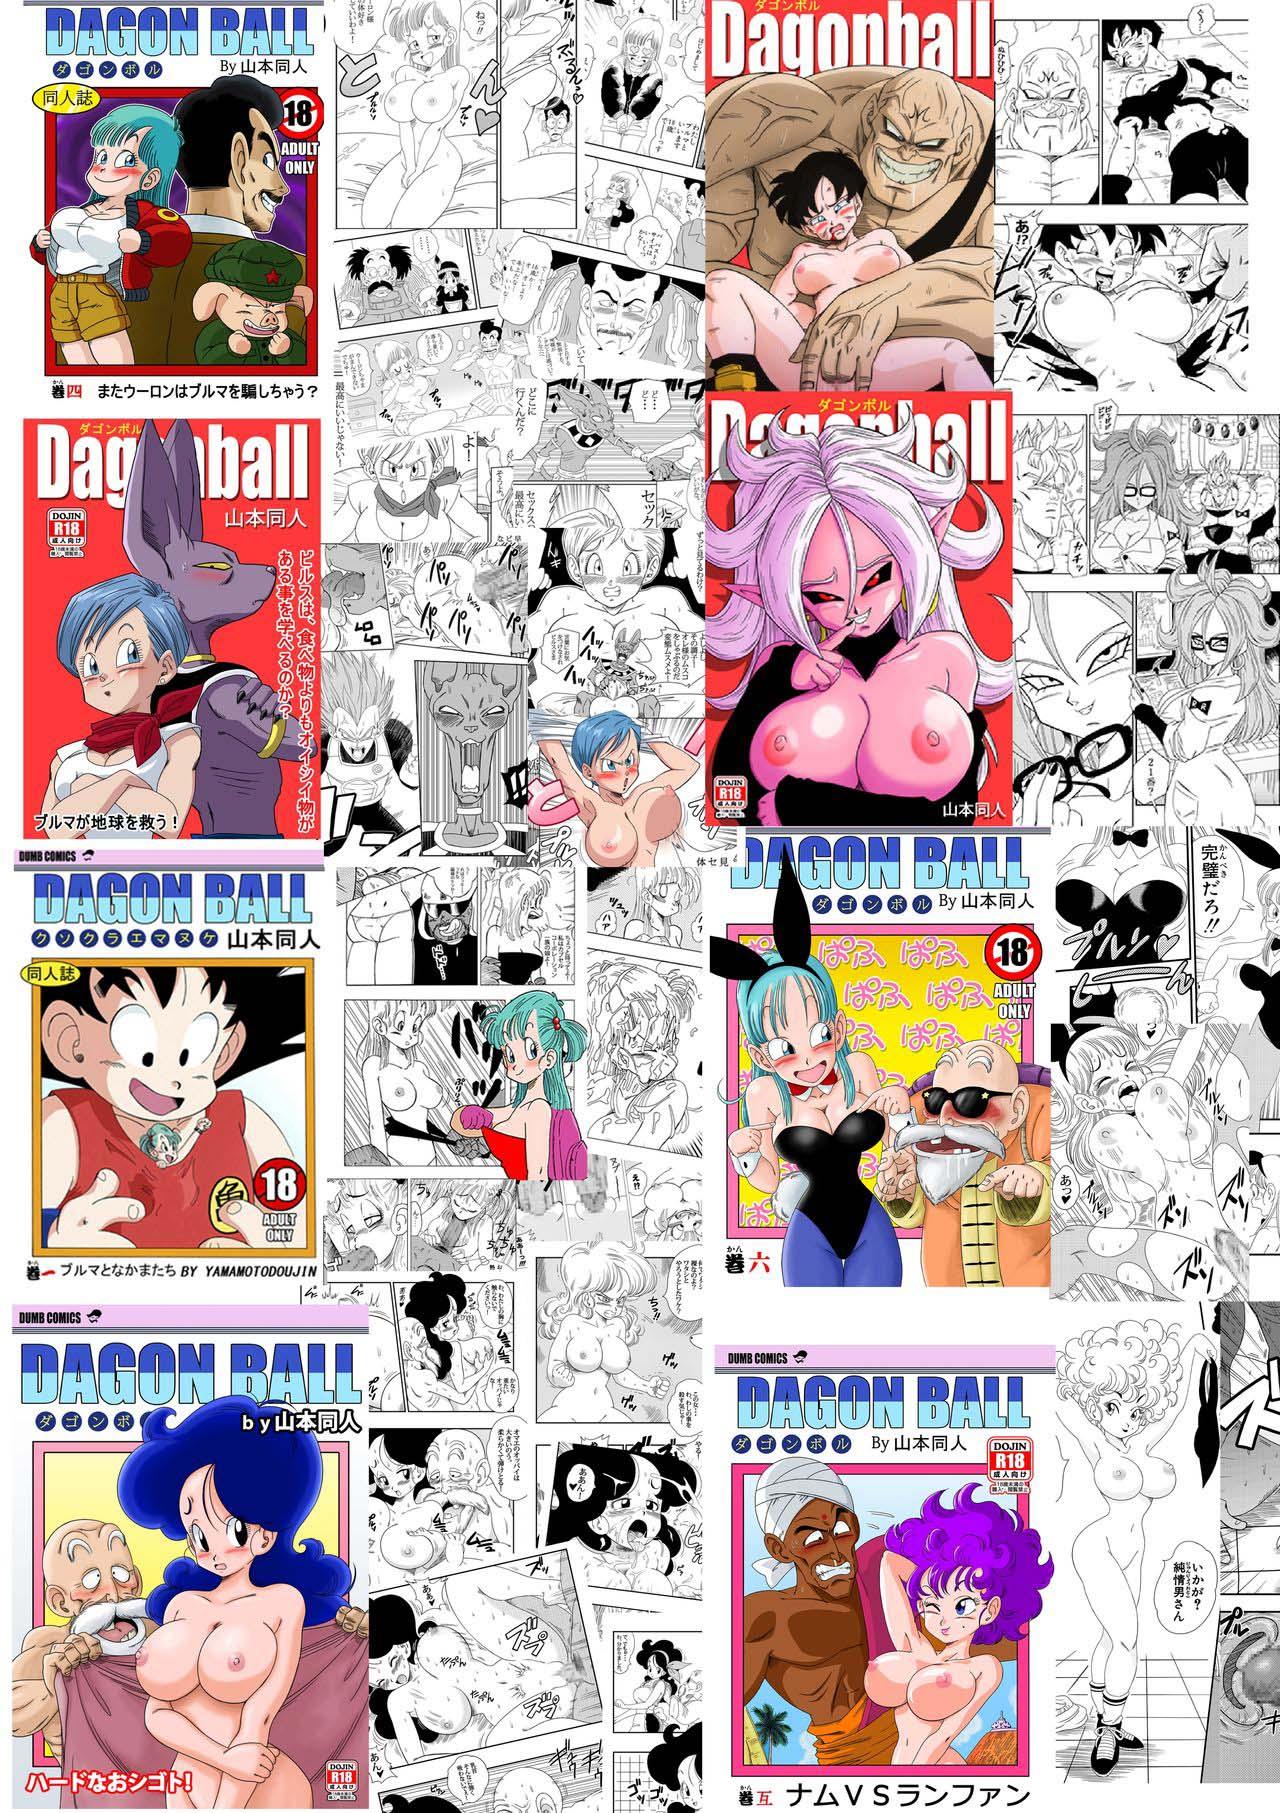 Bisex LOVE TRIANGLE Z Part 2 - Dragon ball z Glasses - Page 29